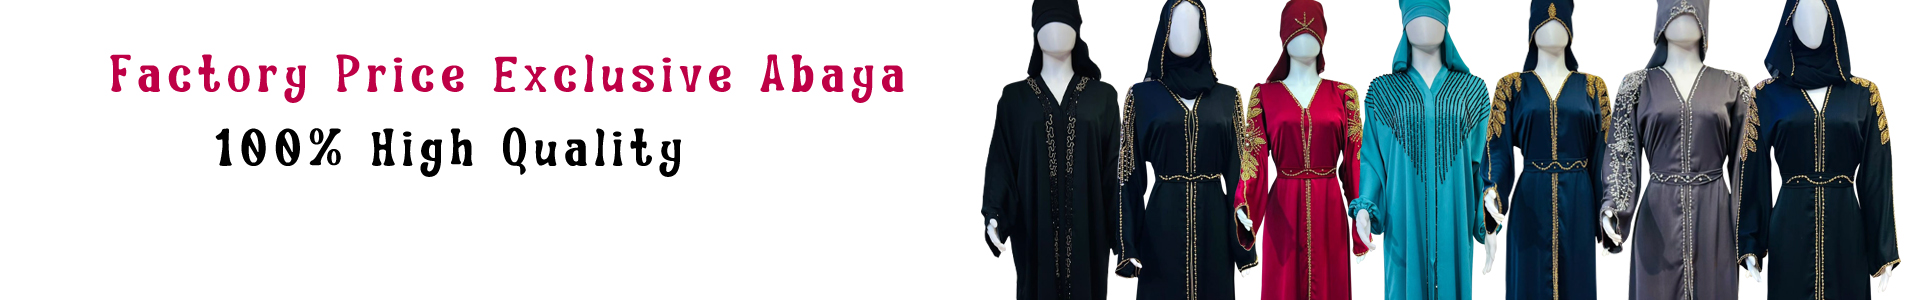 USD $ 24.89 Factory Price Exclusive Abaya